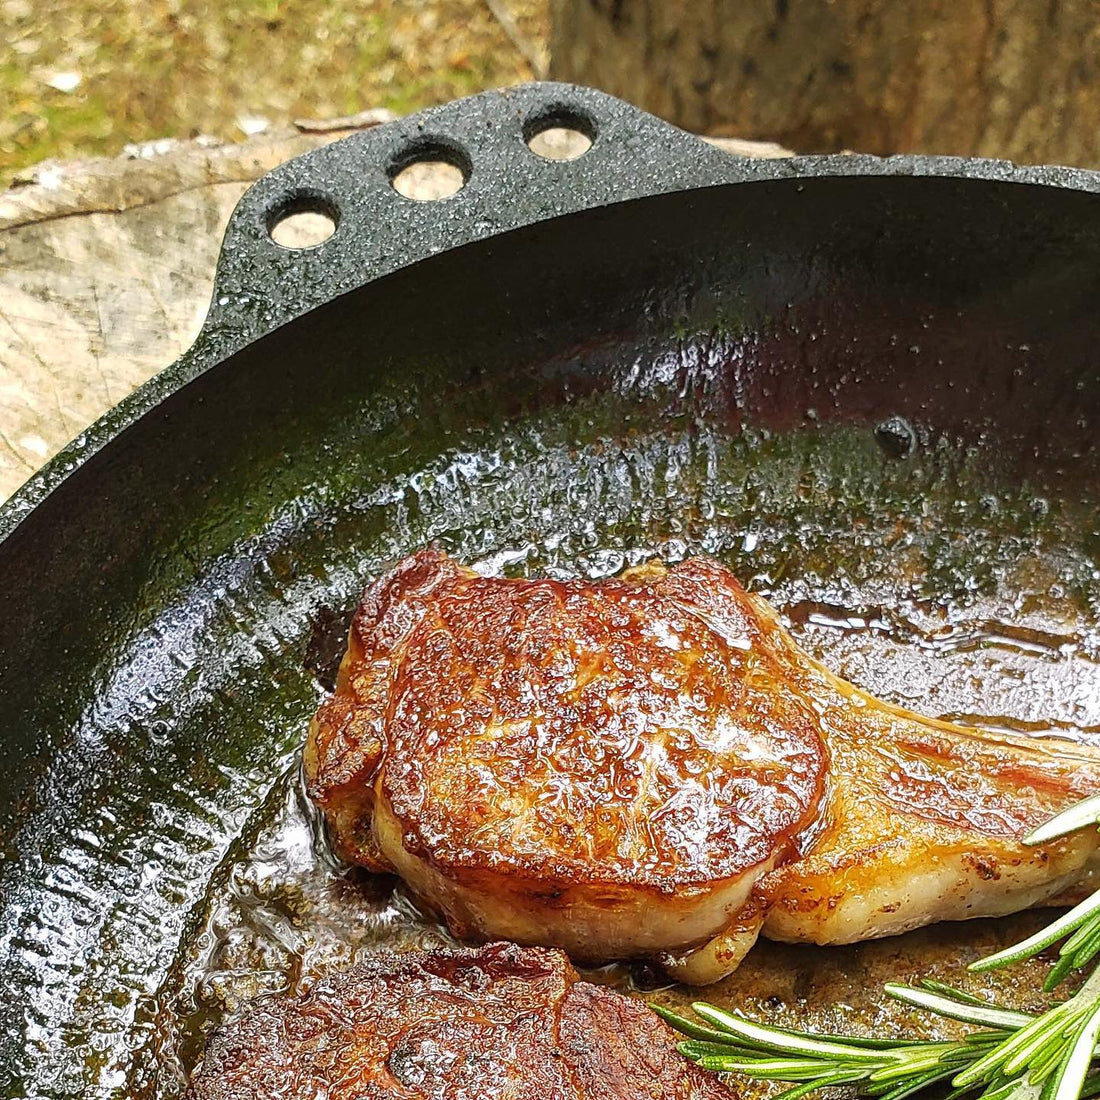 Smithey Farmhouse Skillet, Hand-Forged Carbon Steel, 12 Frying Pan